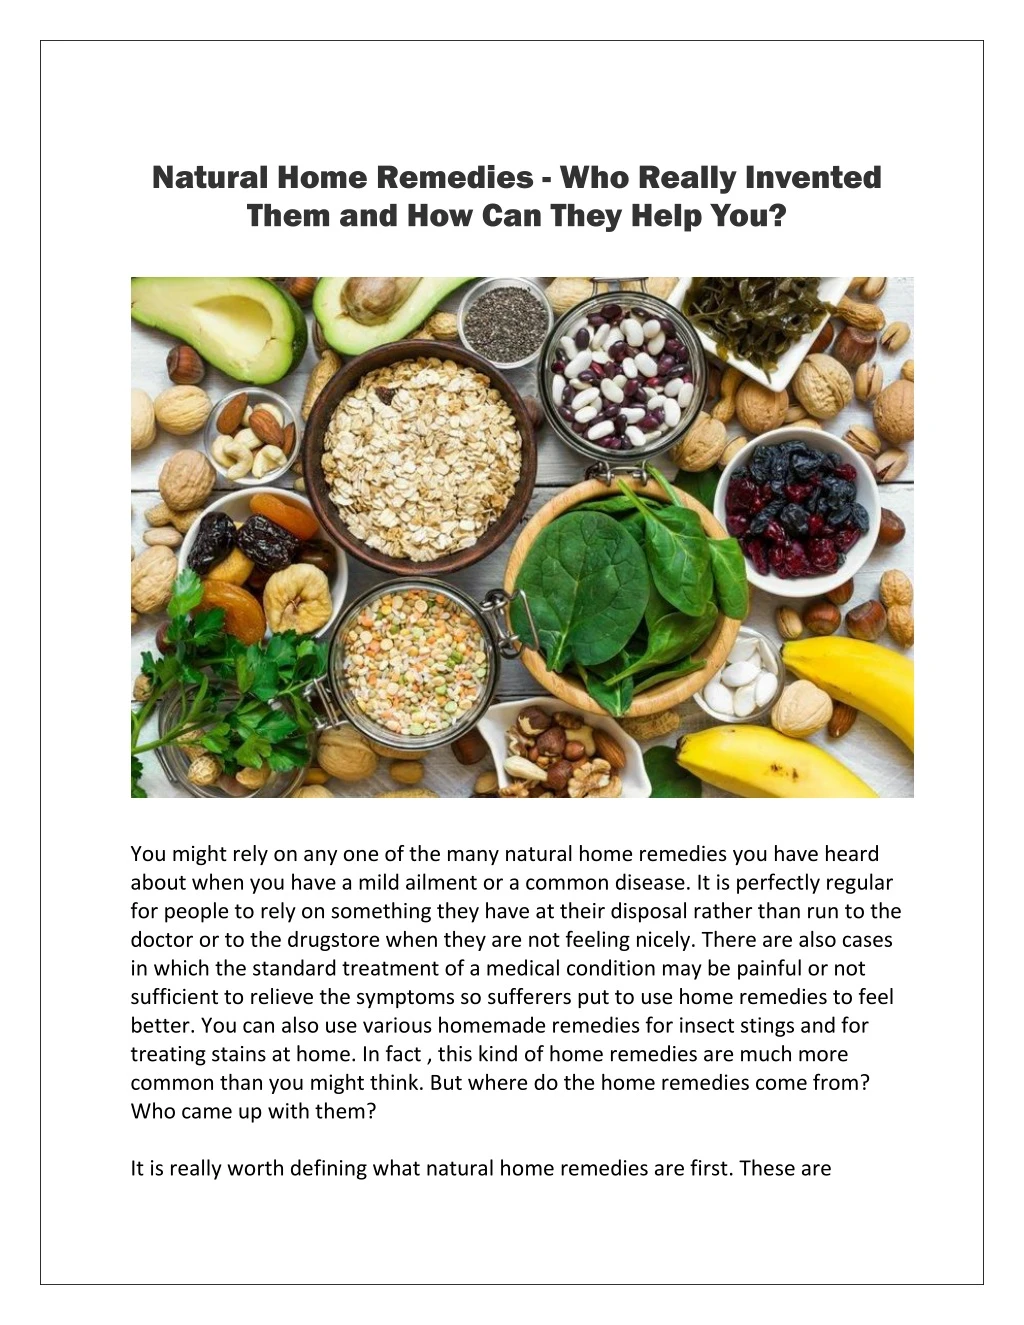 natural home remedies who really invented them